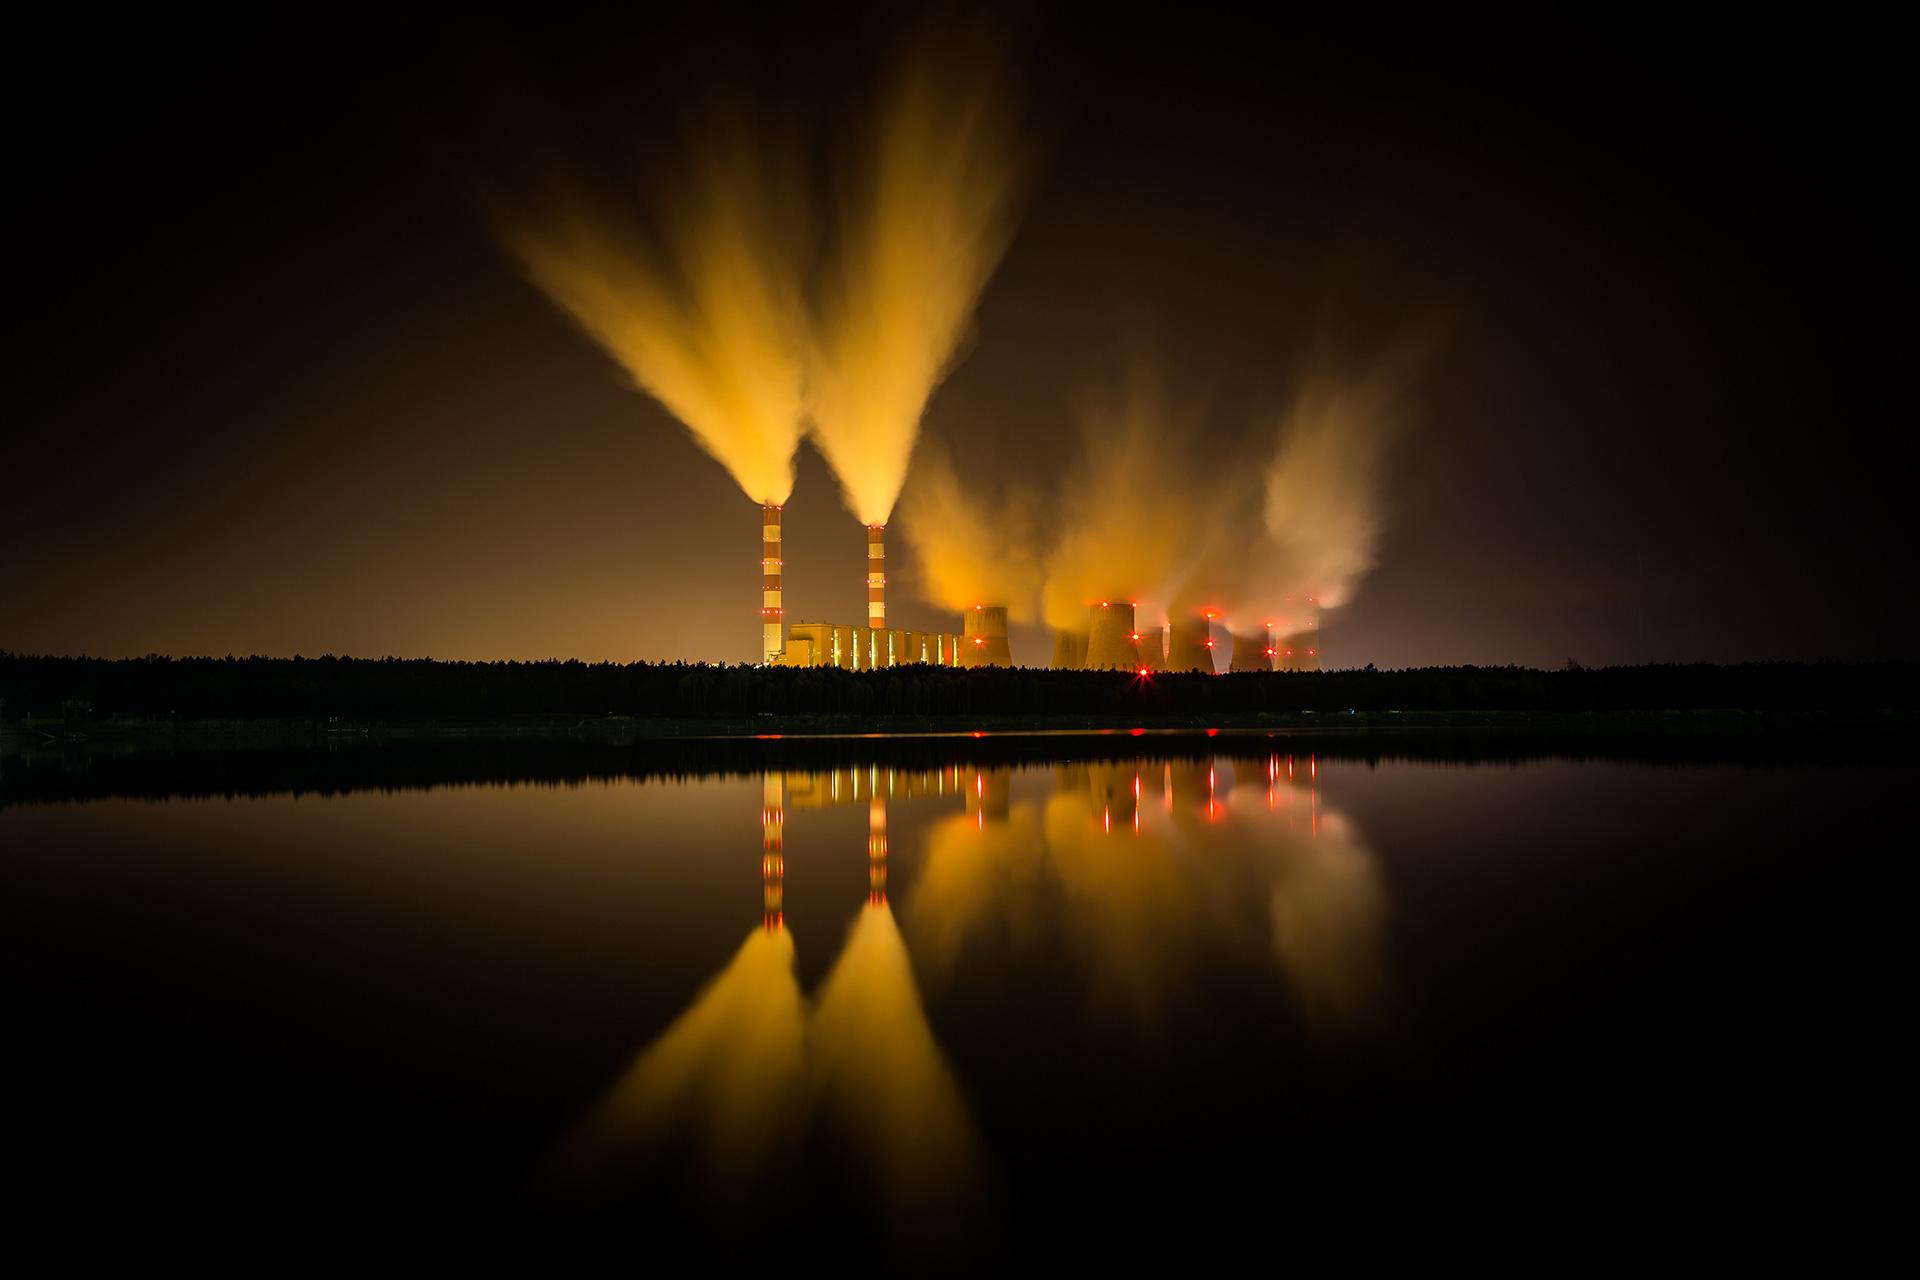 View of steam emissions from a nuclear power plant, Poland